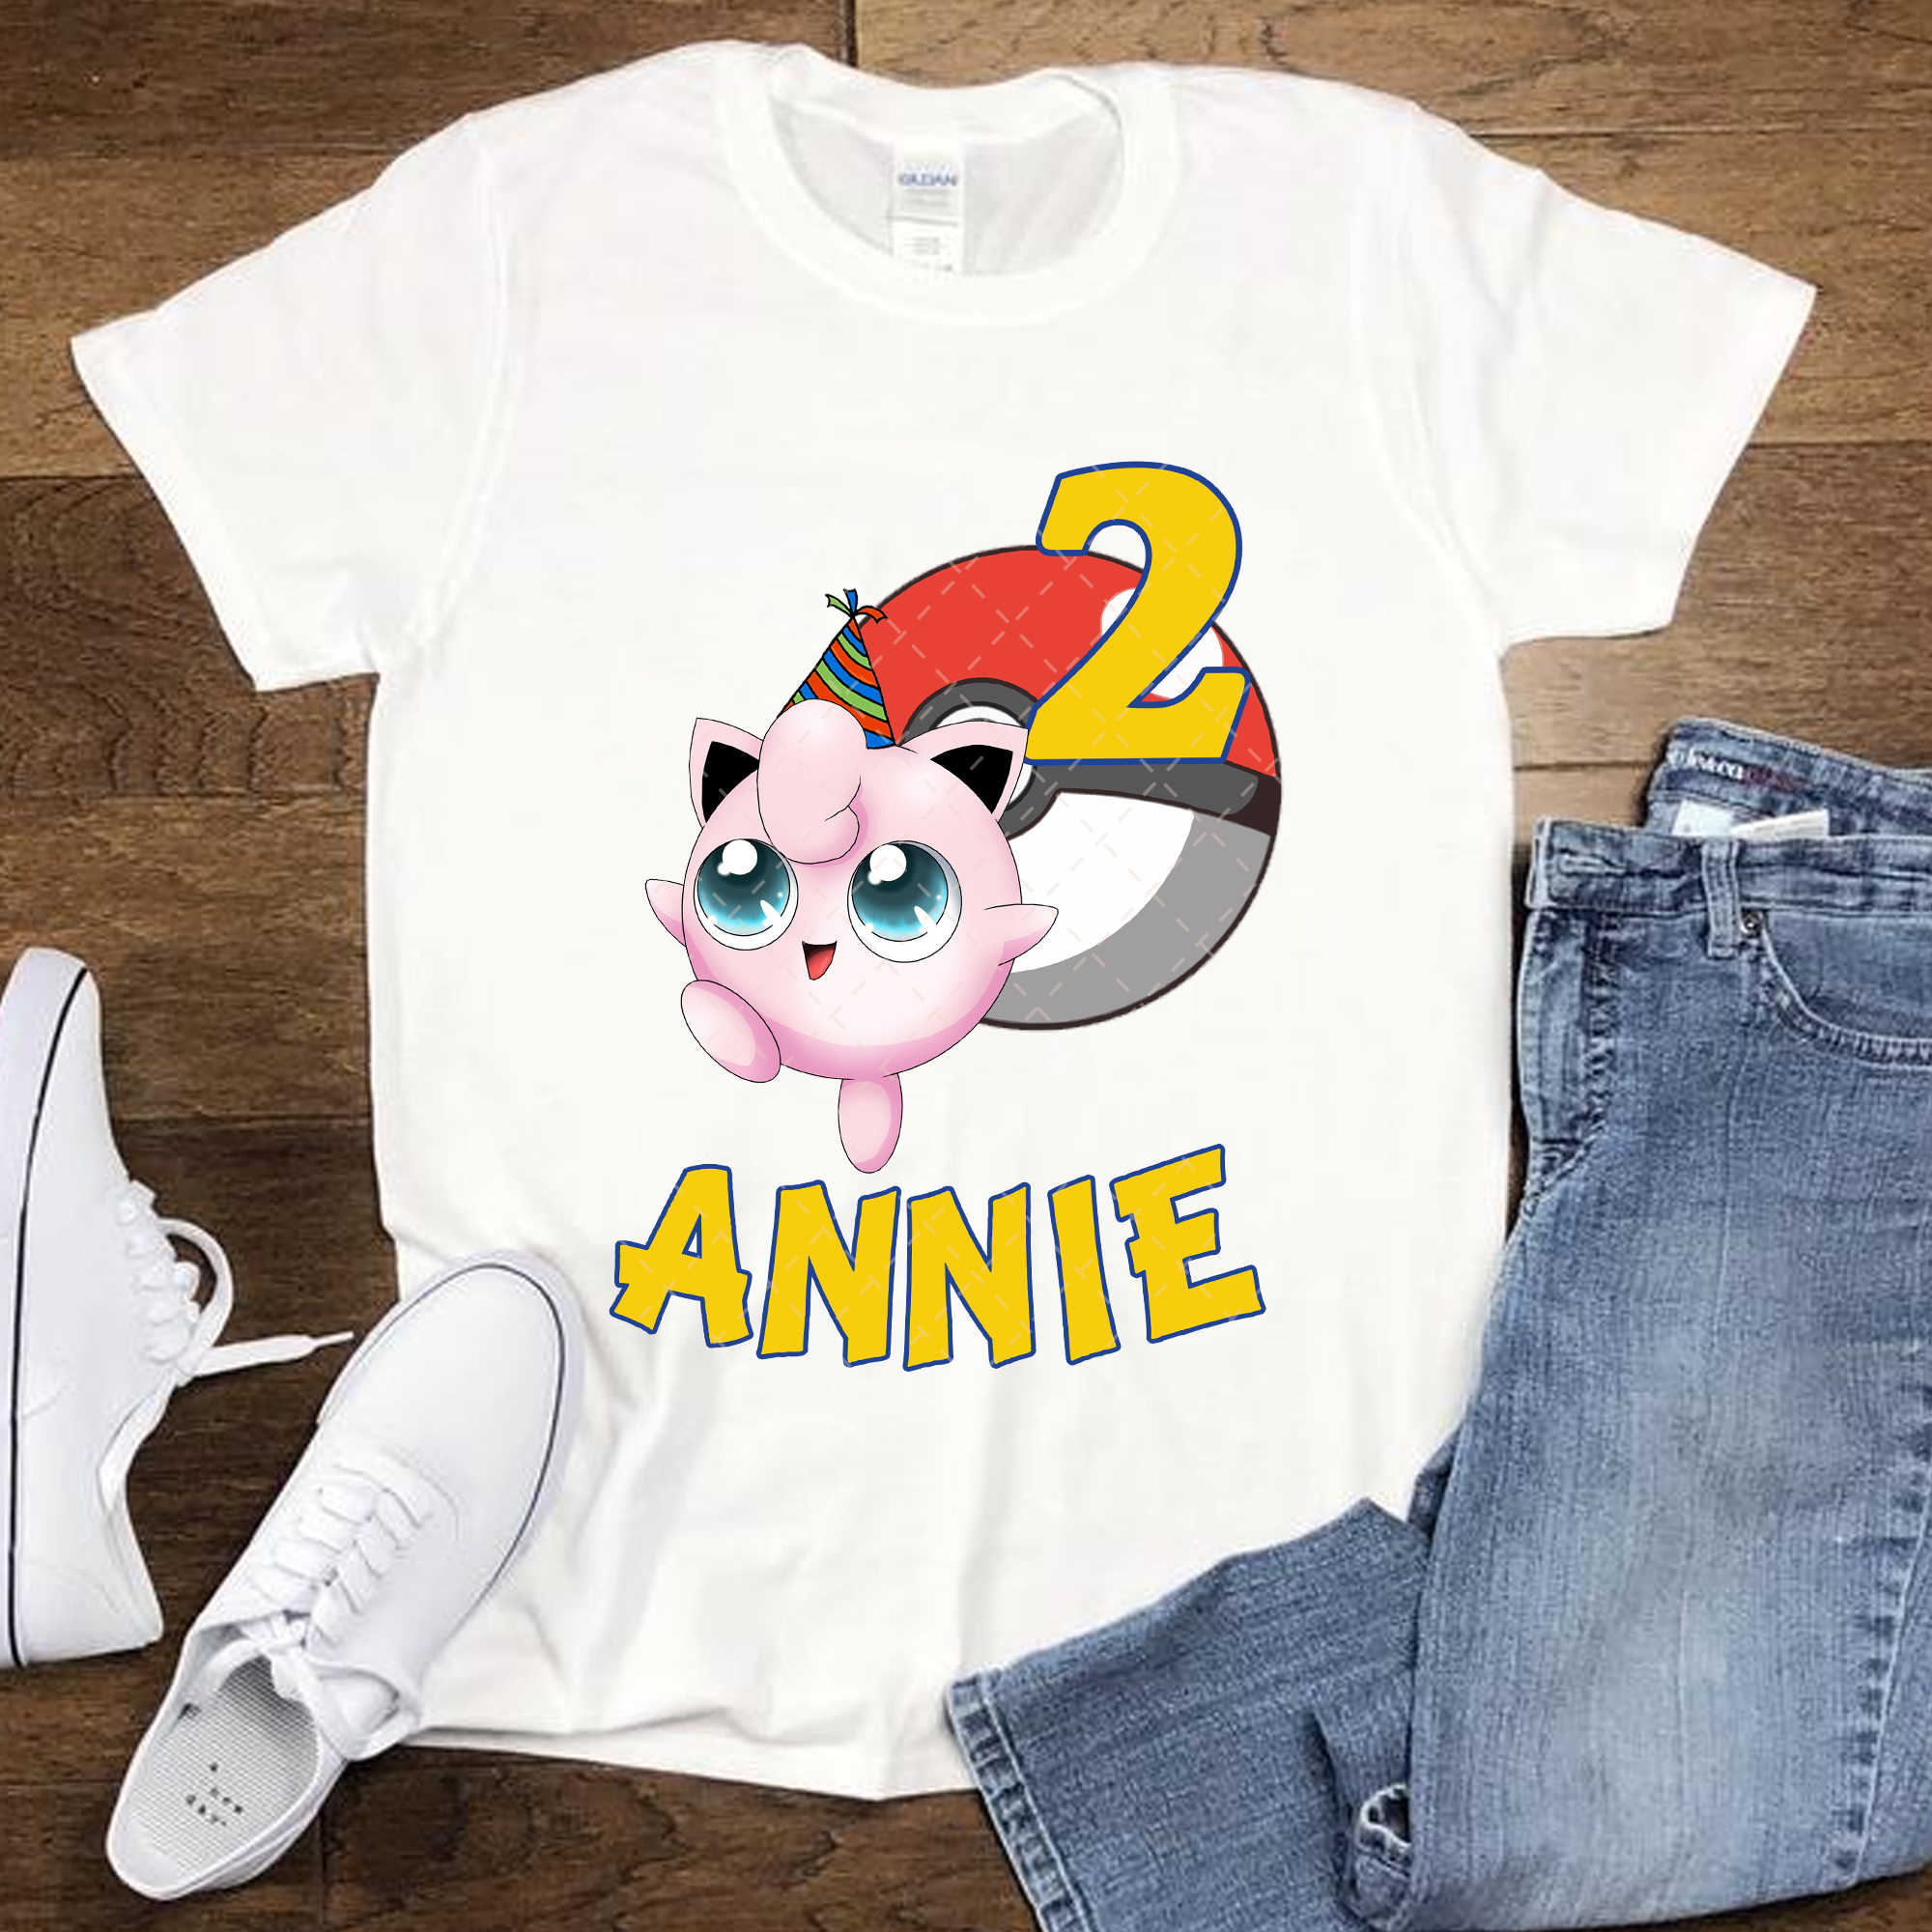 Jigglypuff Pokemon Custom Birthday Party T-shirt, Personalized With Name And Age